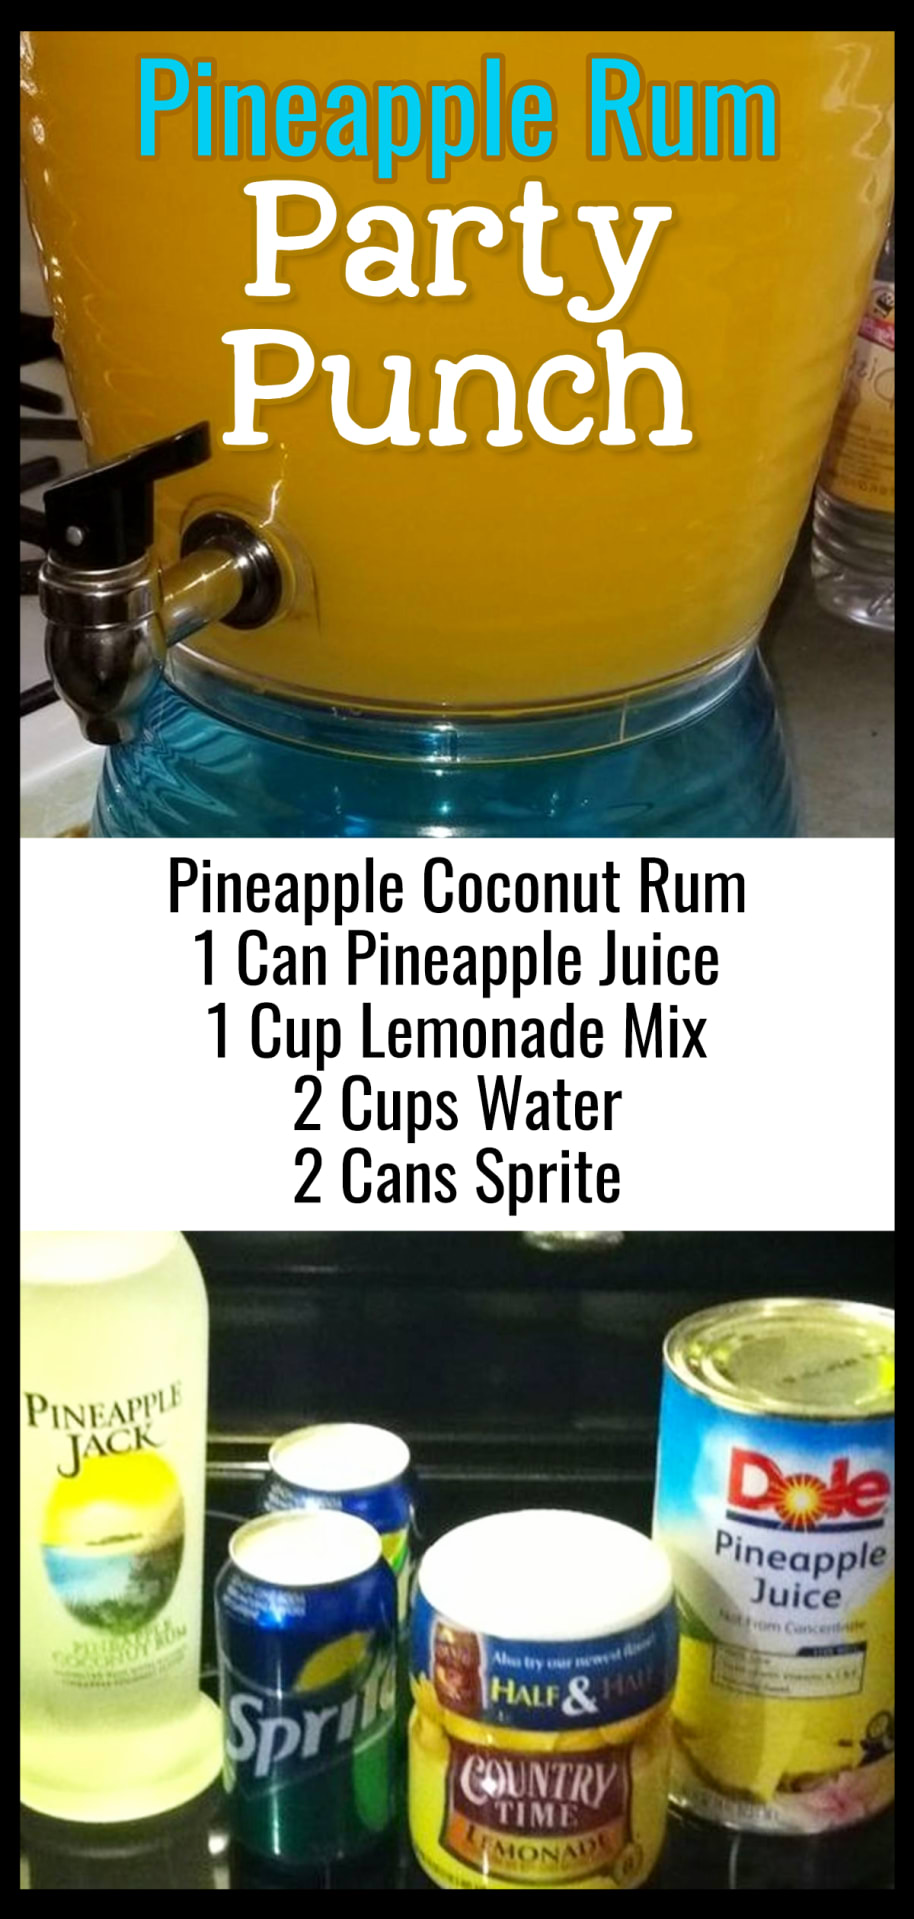 Pineapple Rum Party Punch Recipe - Easy Punch Recipes for a Crowd and Easy Party Drinks Ideas - Cranberry Vodka Punch, Pineapple Orange Juice Alcoholic Drinks, Punch for 50 and Simple Punch Recipes for a Crowd, Party, Brunch, Cookout or Bridal Shower - non-alcoholic punch recipes and simple alcoholic punch recipes, non-alcoholic holiday punch, easy fruit punch recipes, easy punch recipes with sprite and pineapple juice, jungle juice recipe with fruit